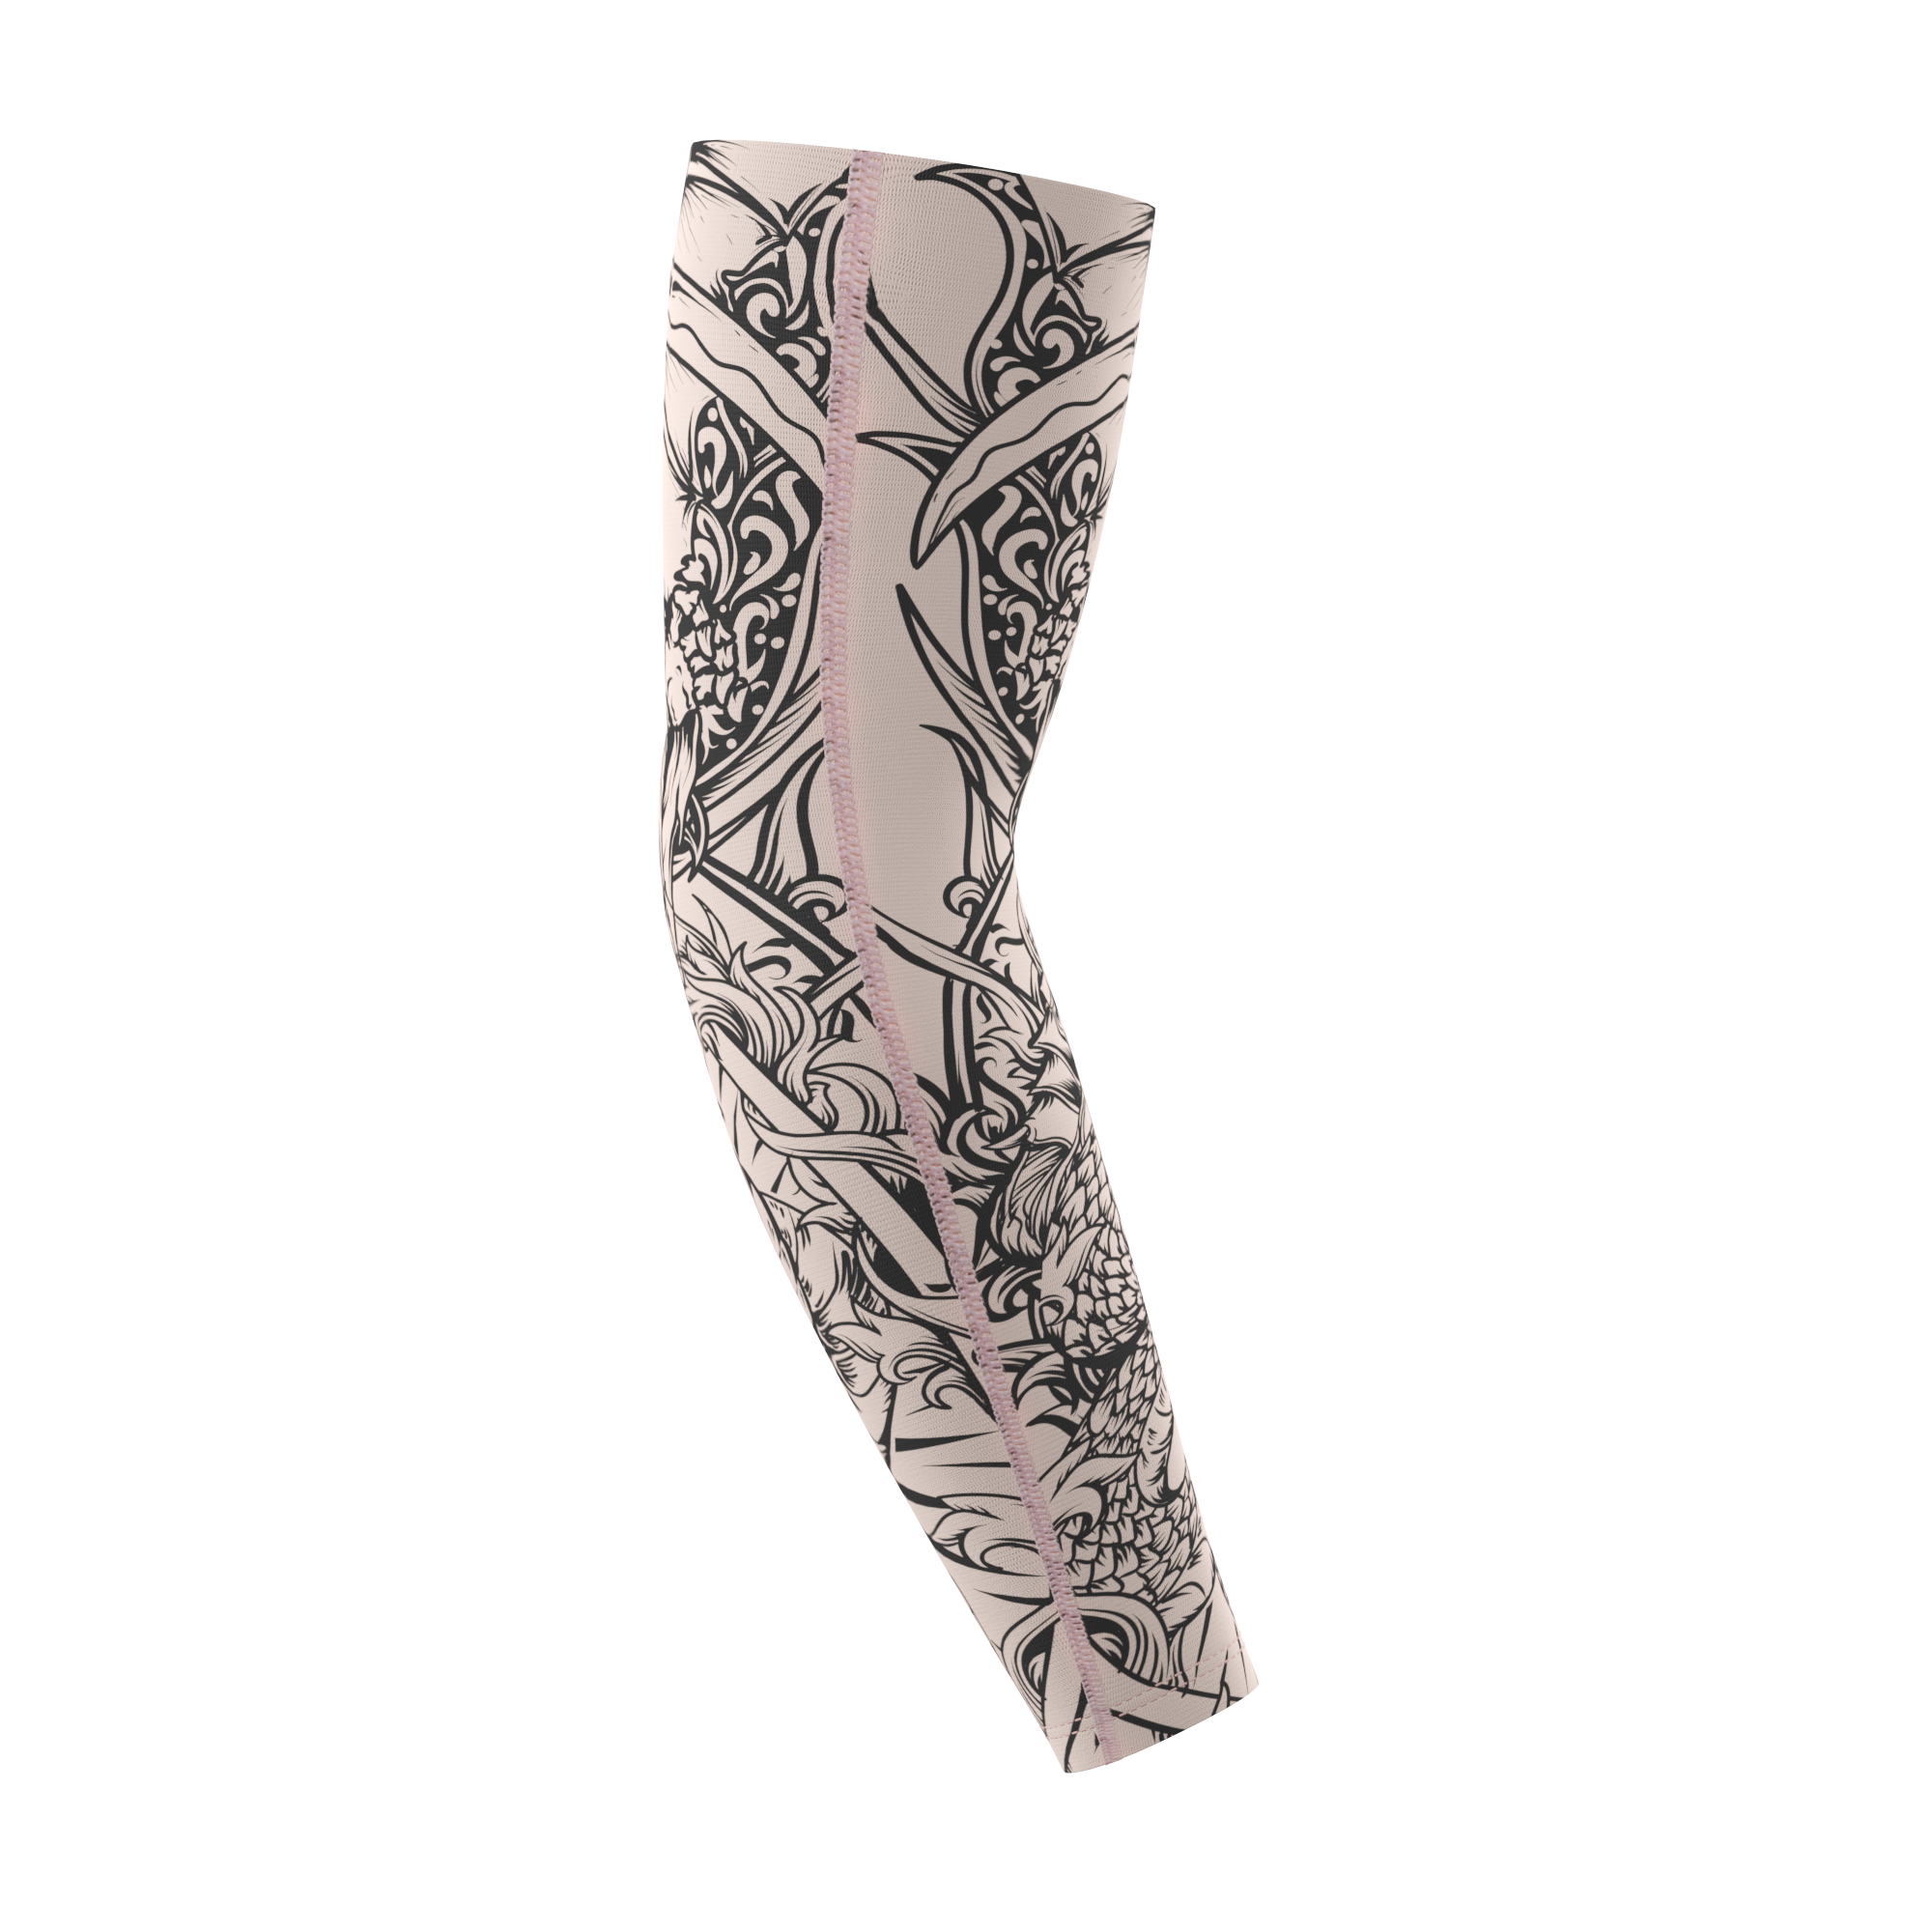 Sun Protect Tattoos with UV Arm Sleeves